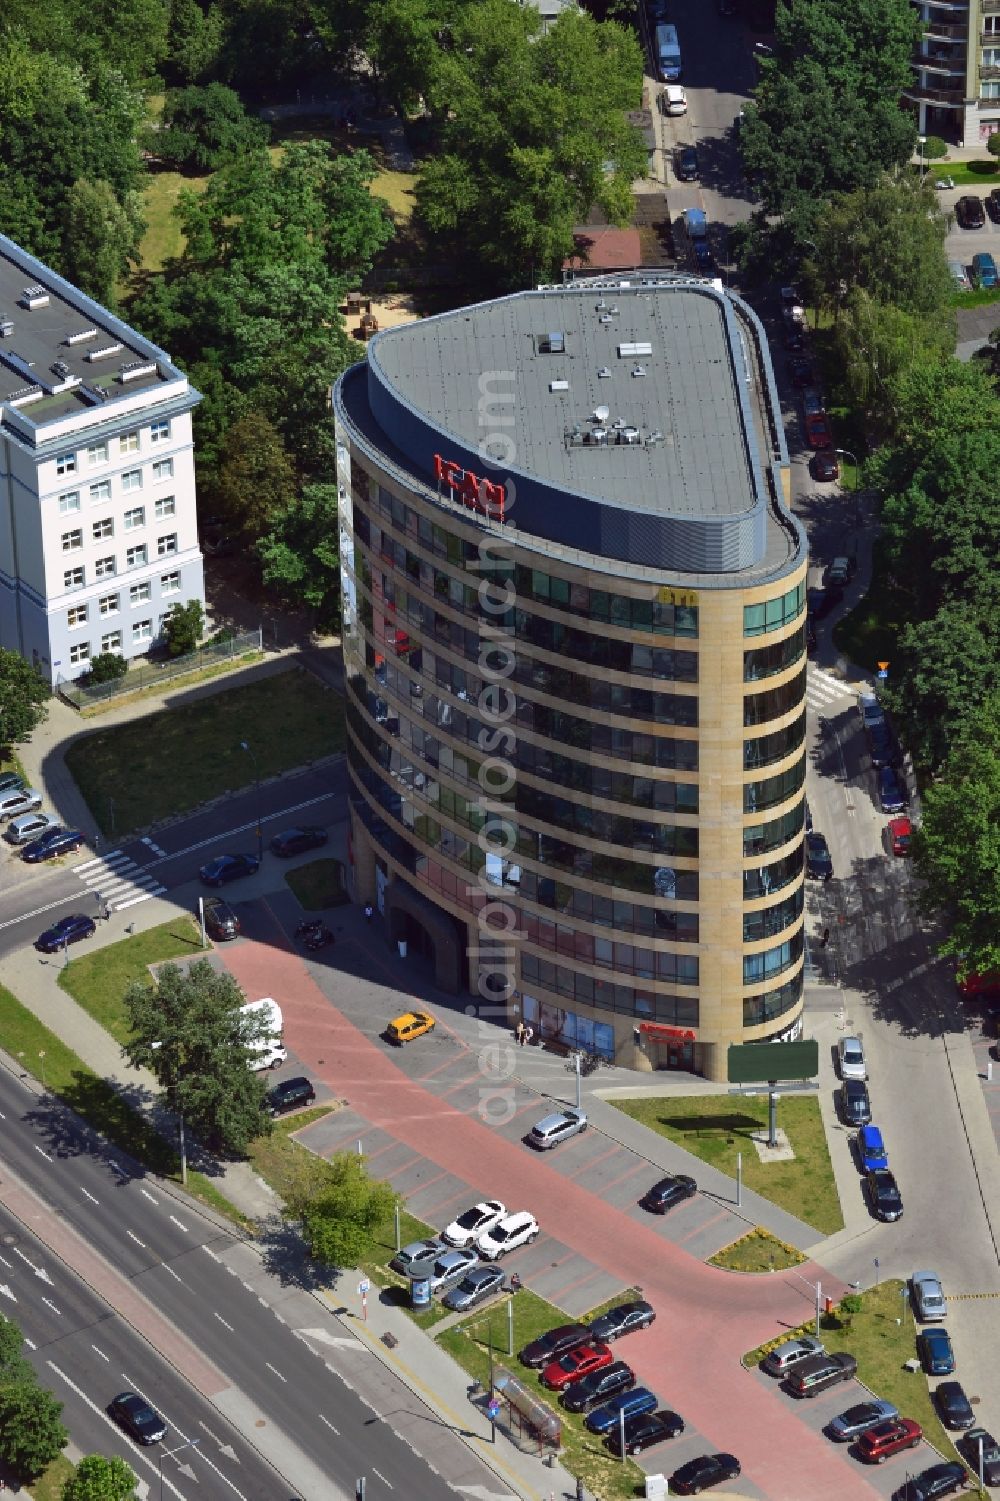 Aerial photograph Warschau - The office building of ICAN Institute in the Ksawerow part of the district of Mokotow in Warsaw in Poland. Inside the building there are several coworking spaces, restaurants and shopping facilities. The distinct building with the round and curvy shapes is located on a street corner surrounded by a parking lot